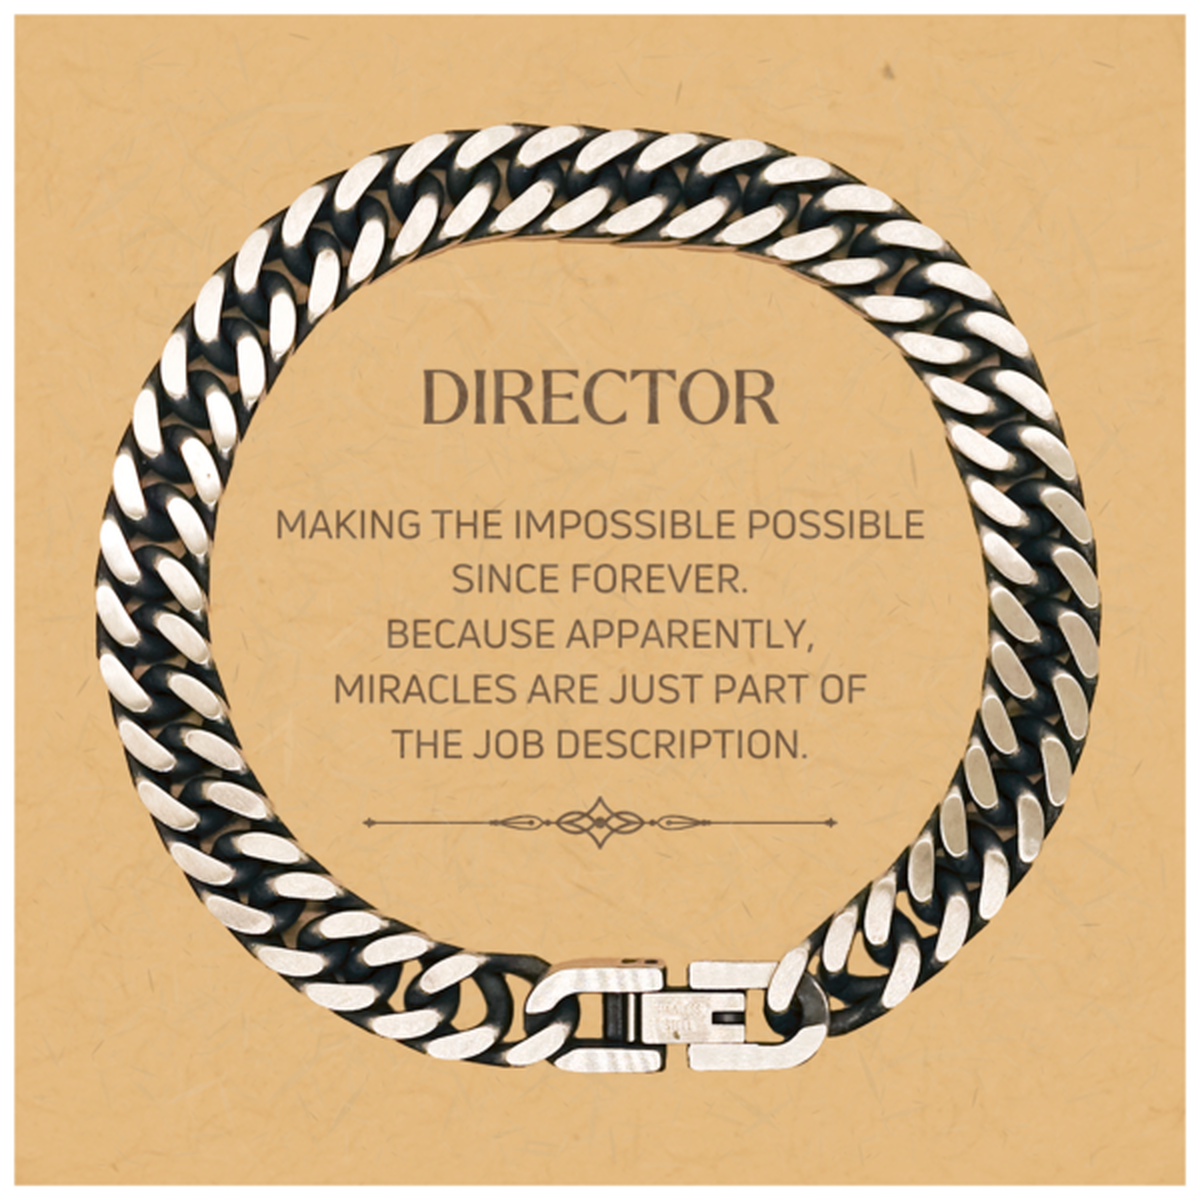 Funny Director Gifts, Miracles are just part of the job description, Inspirational Birthday Christmas Cuban Link Chain Bracelet For Director, Men, Women, Coworkers, Friends, Boss